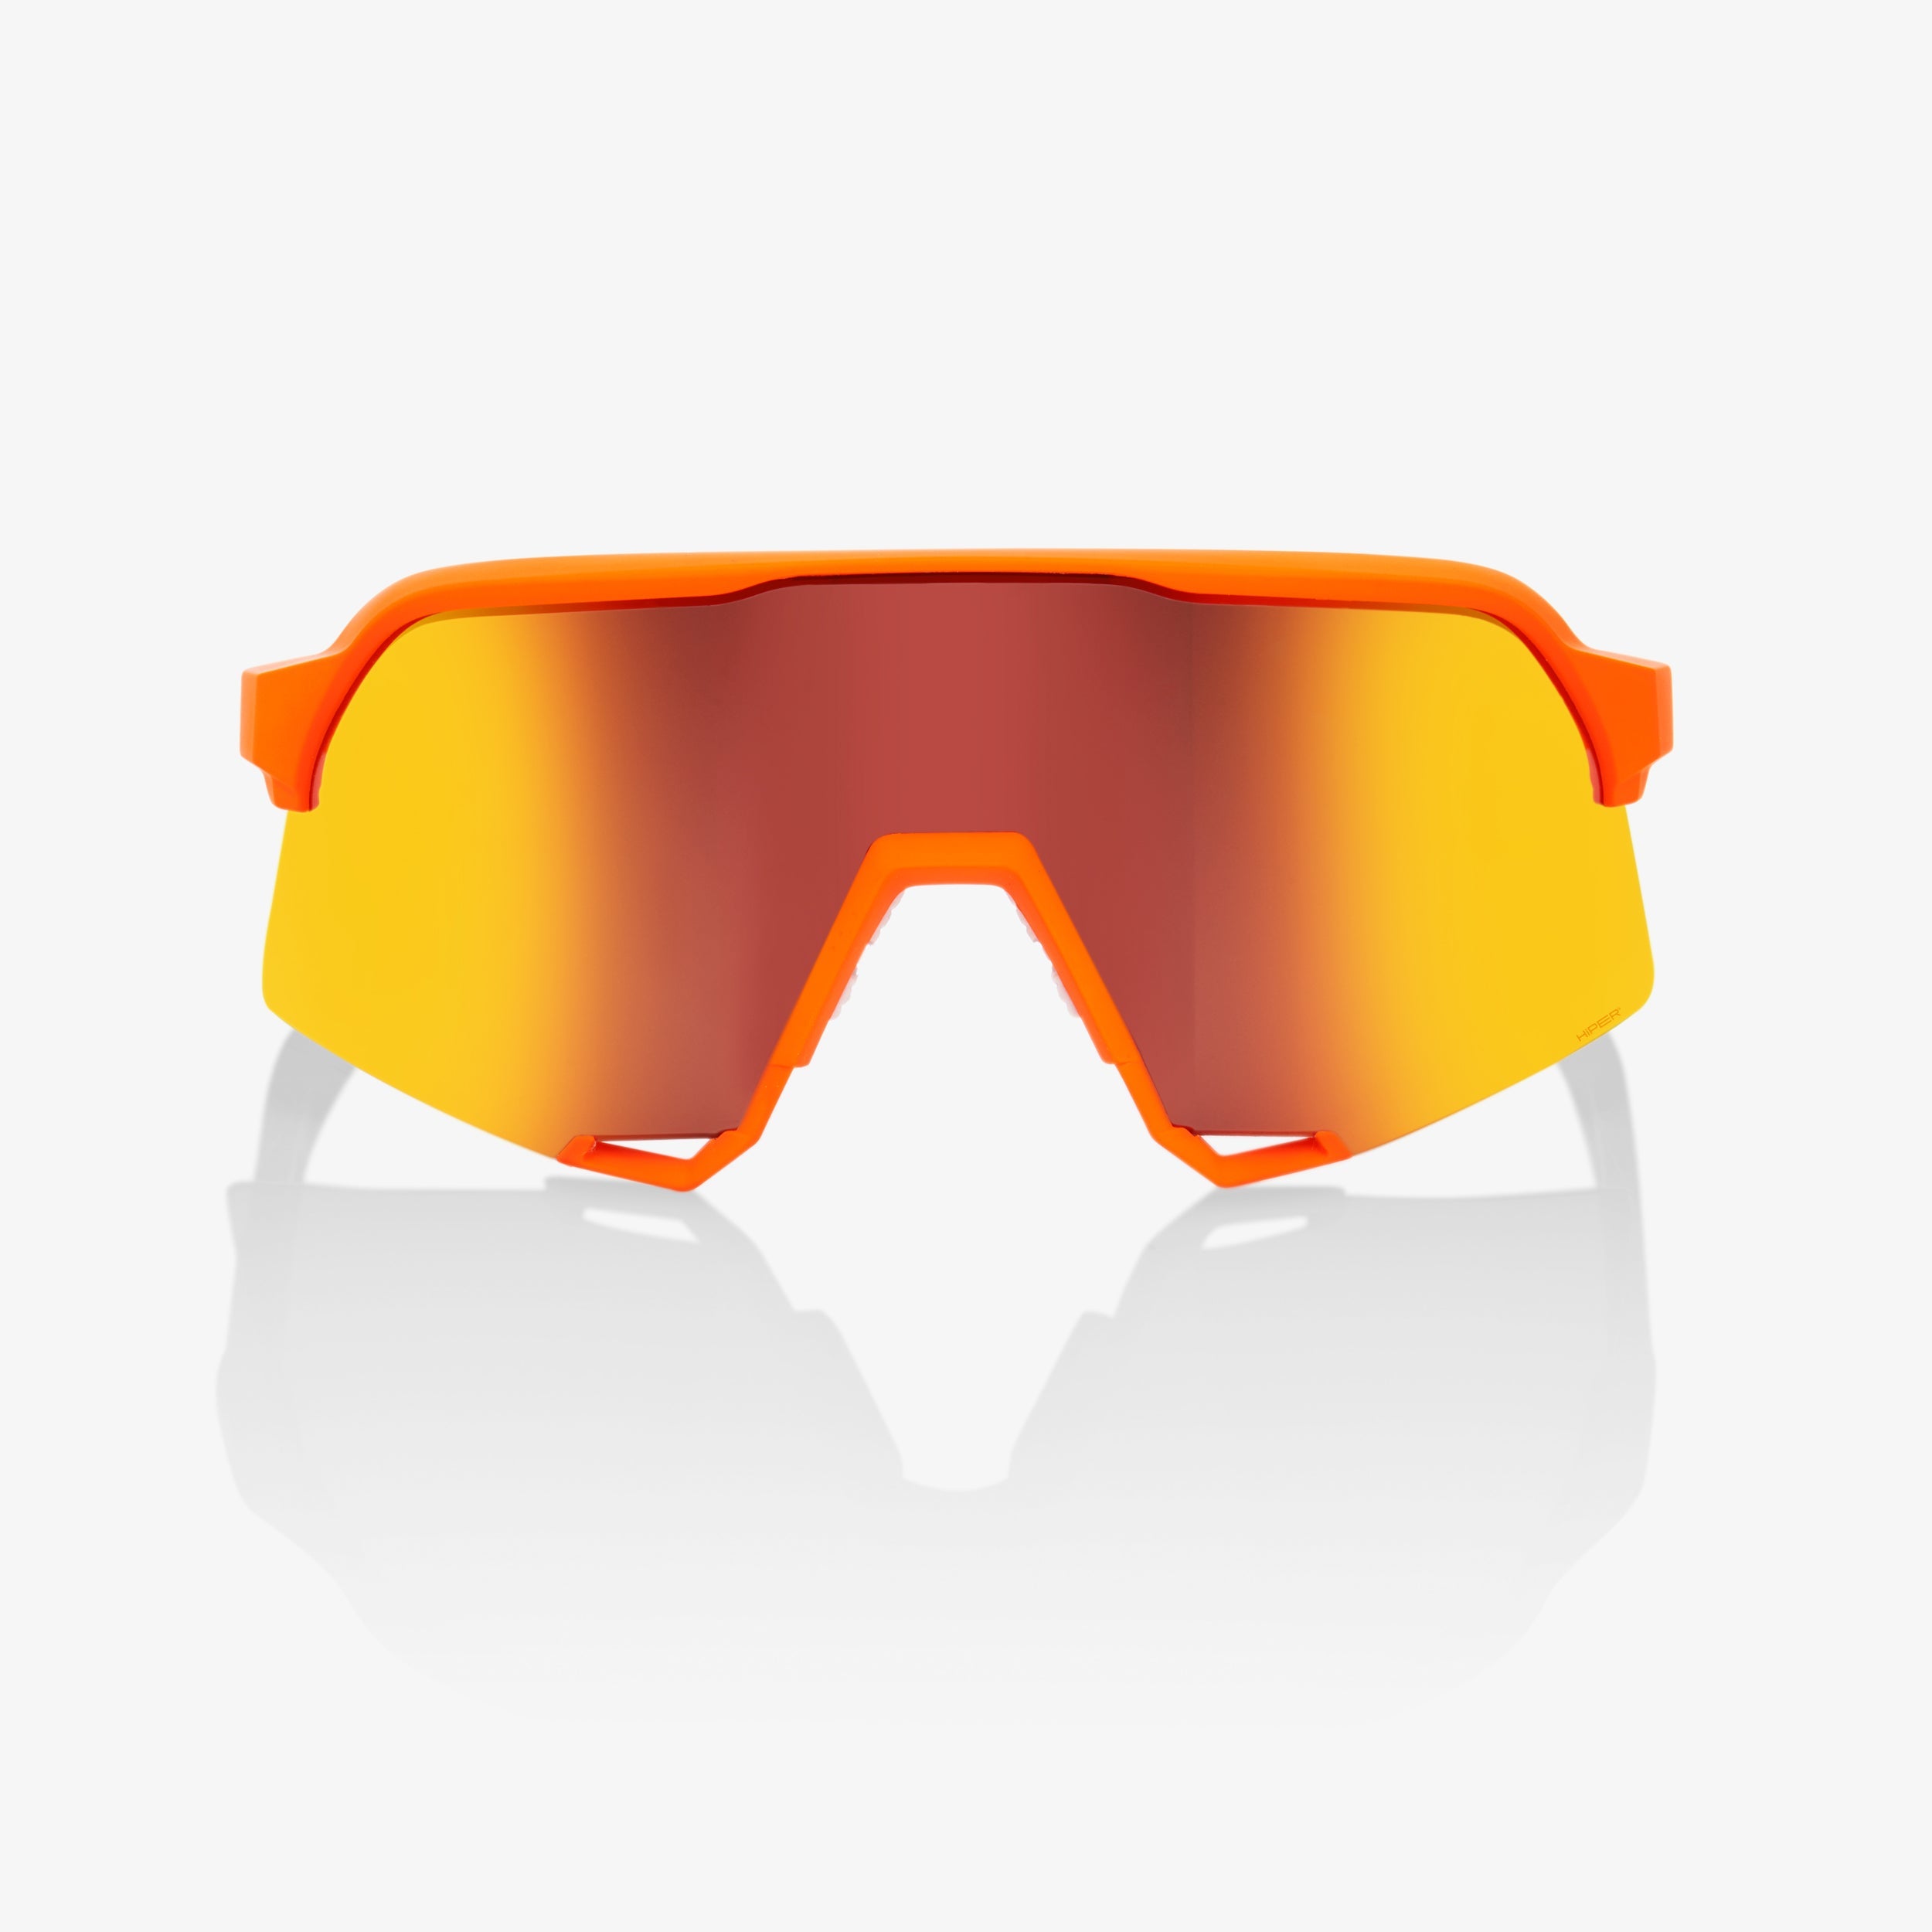 S3 - Soft Tact Neon Orange - HiPER Red Multilayer Mirror Lens - Secondary